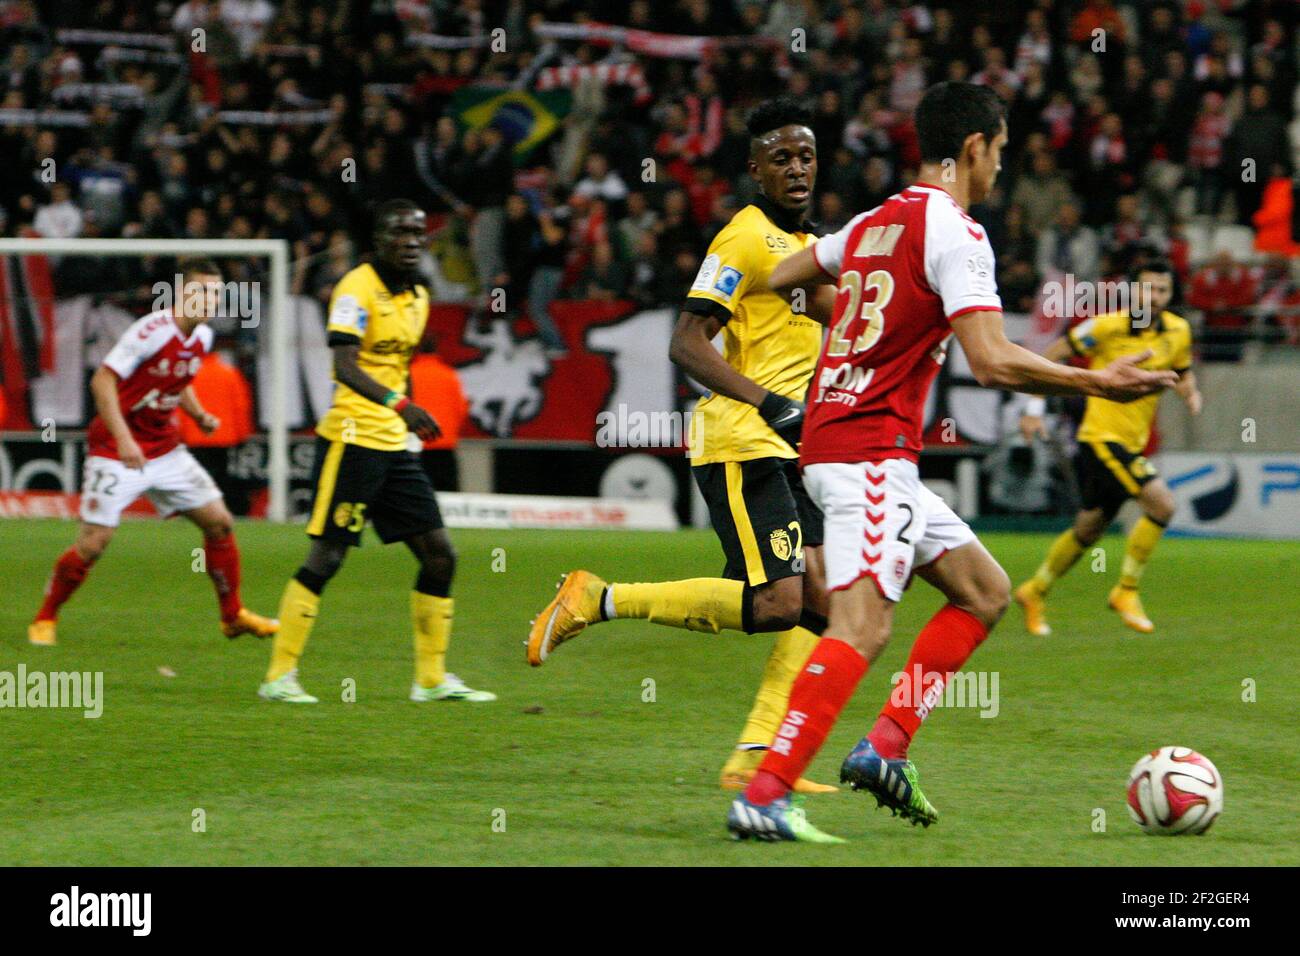 Aissa MANDI (23 Reims) and Divock ORIGI (27 Lille) during the L1 french champ between Stade de Reims and Lille LOSC at Auguste Delaune stadium on november 09, 2014 - Photo Anthony Serpe / DPPI Stock Photo